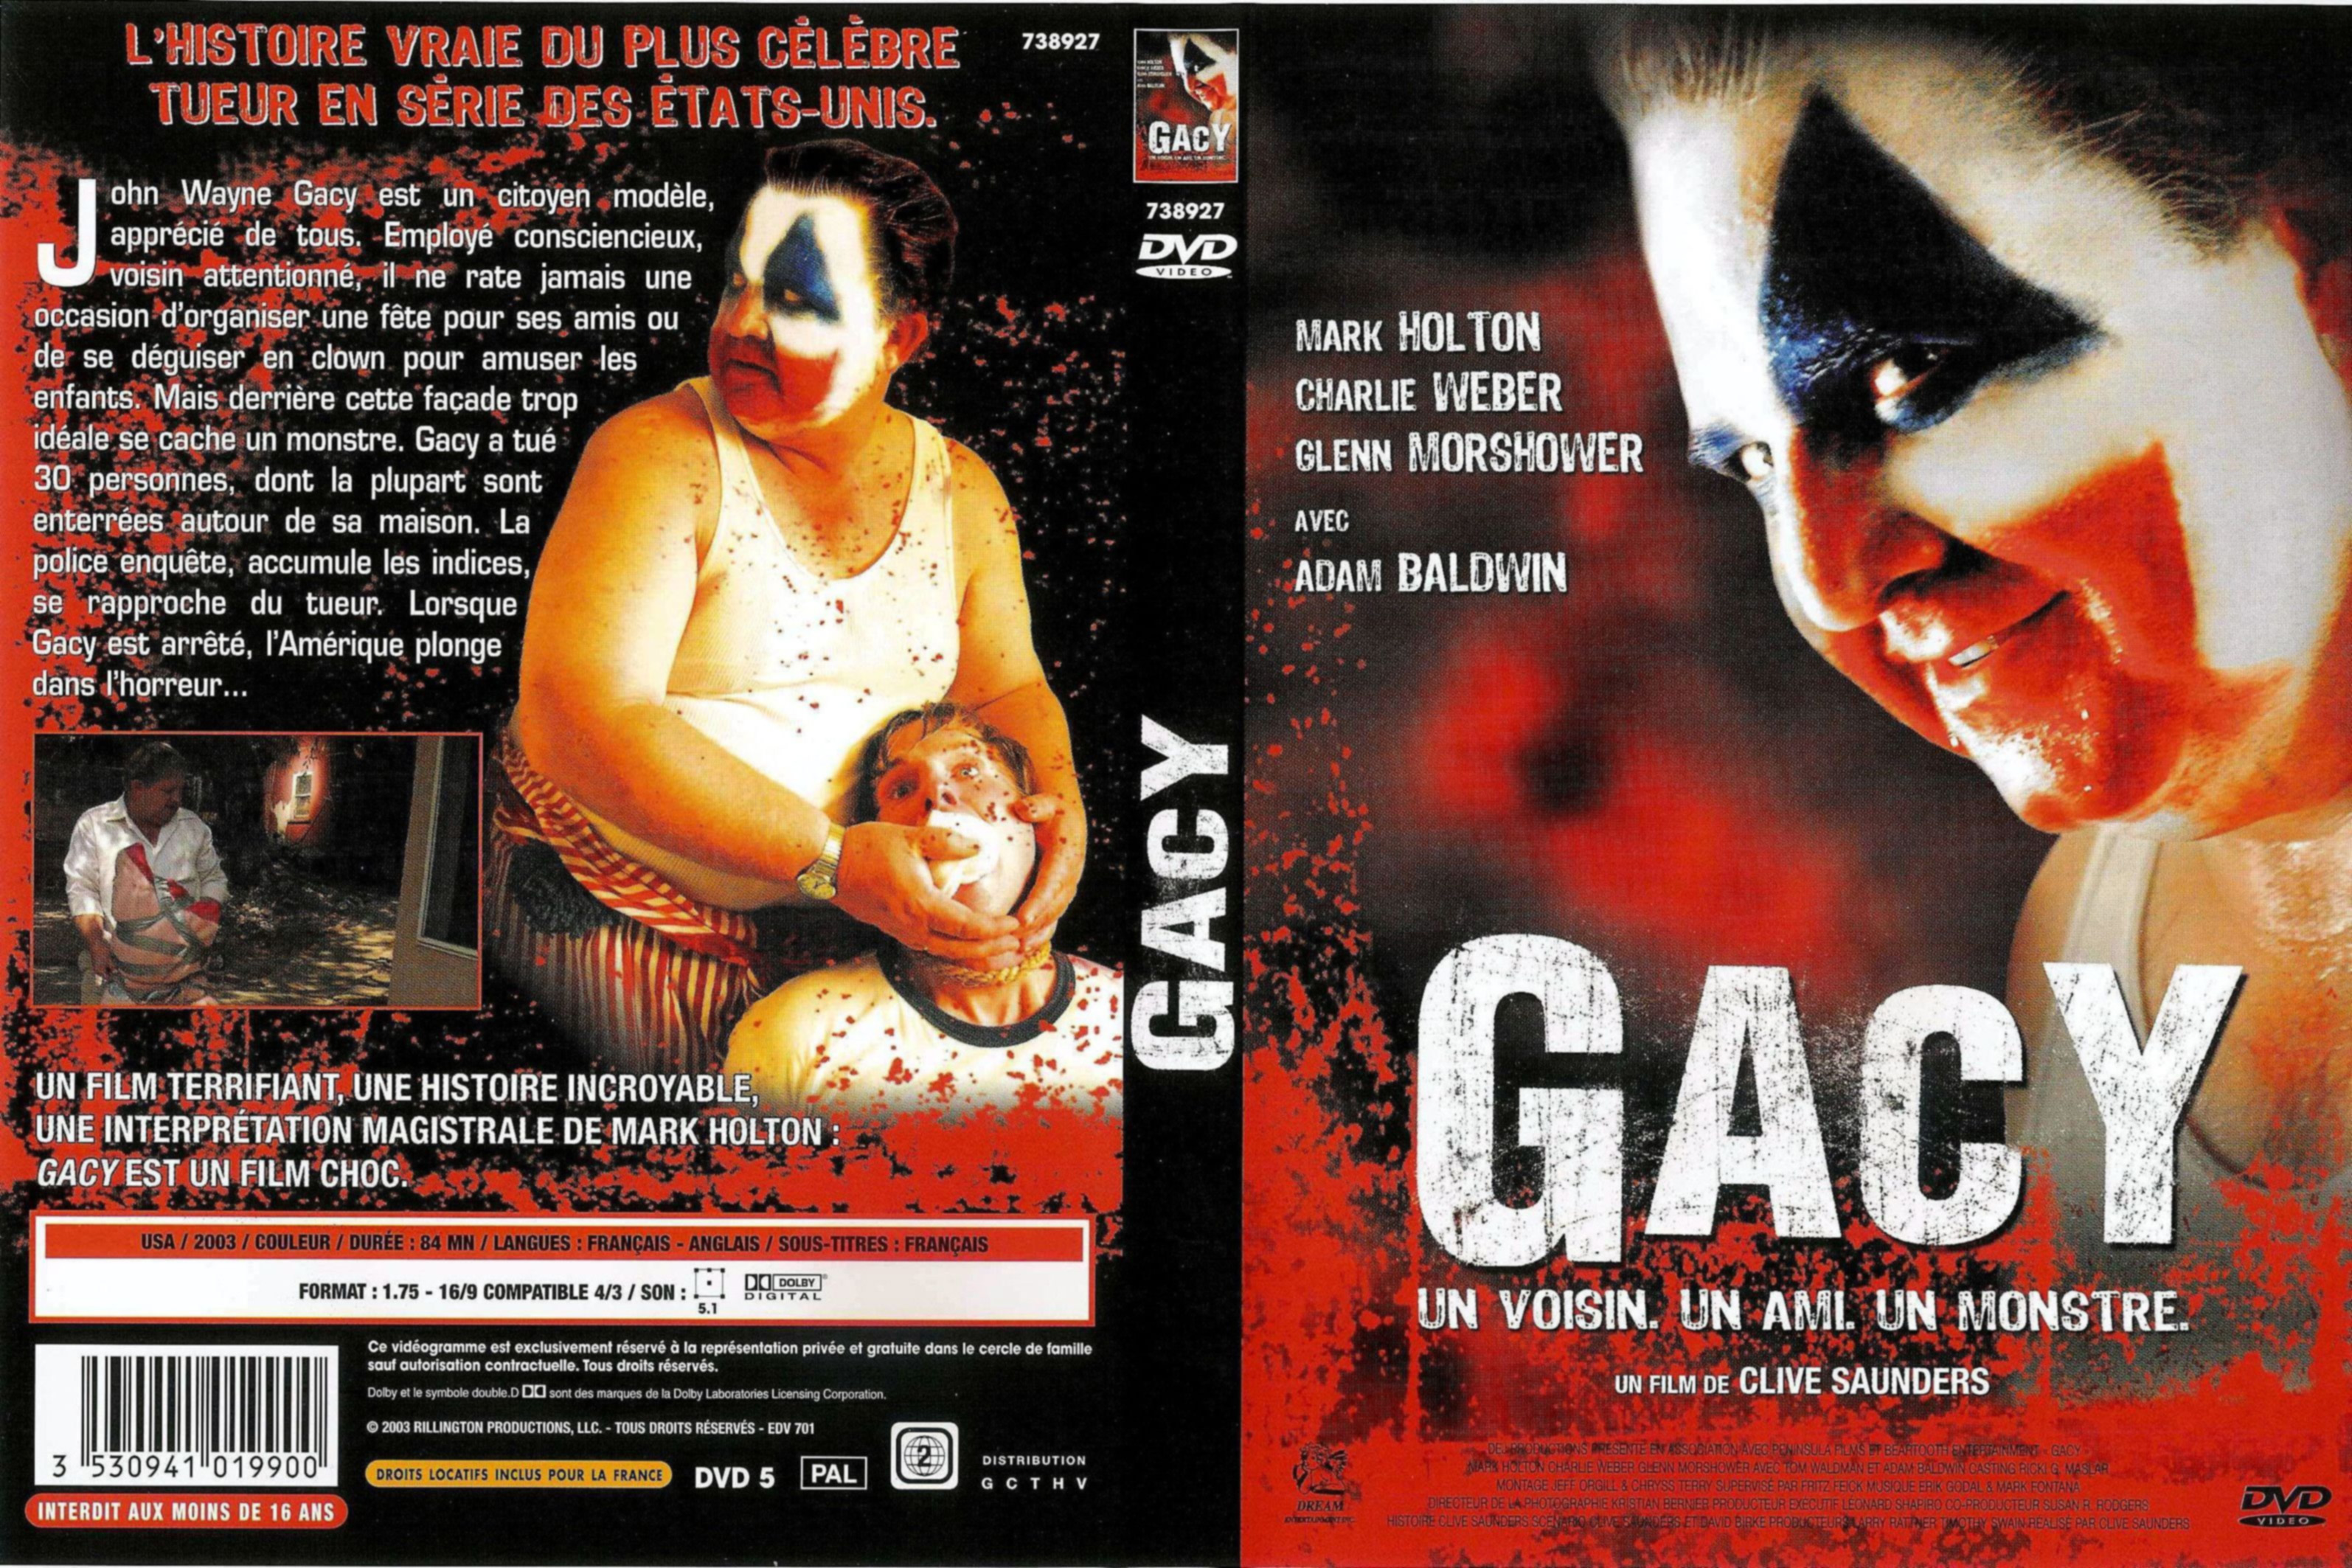 Jaquette DVD Gacy